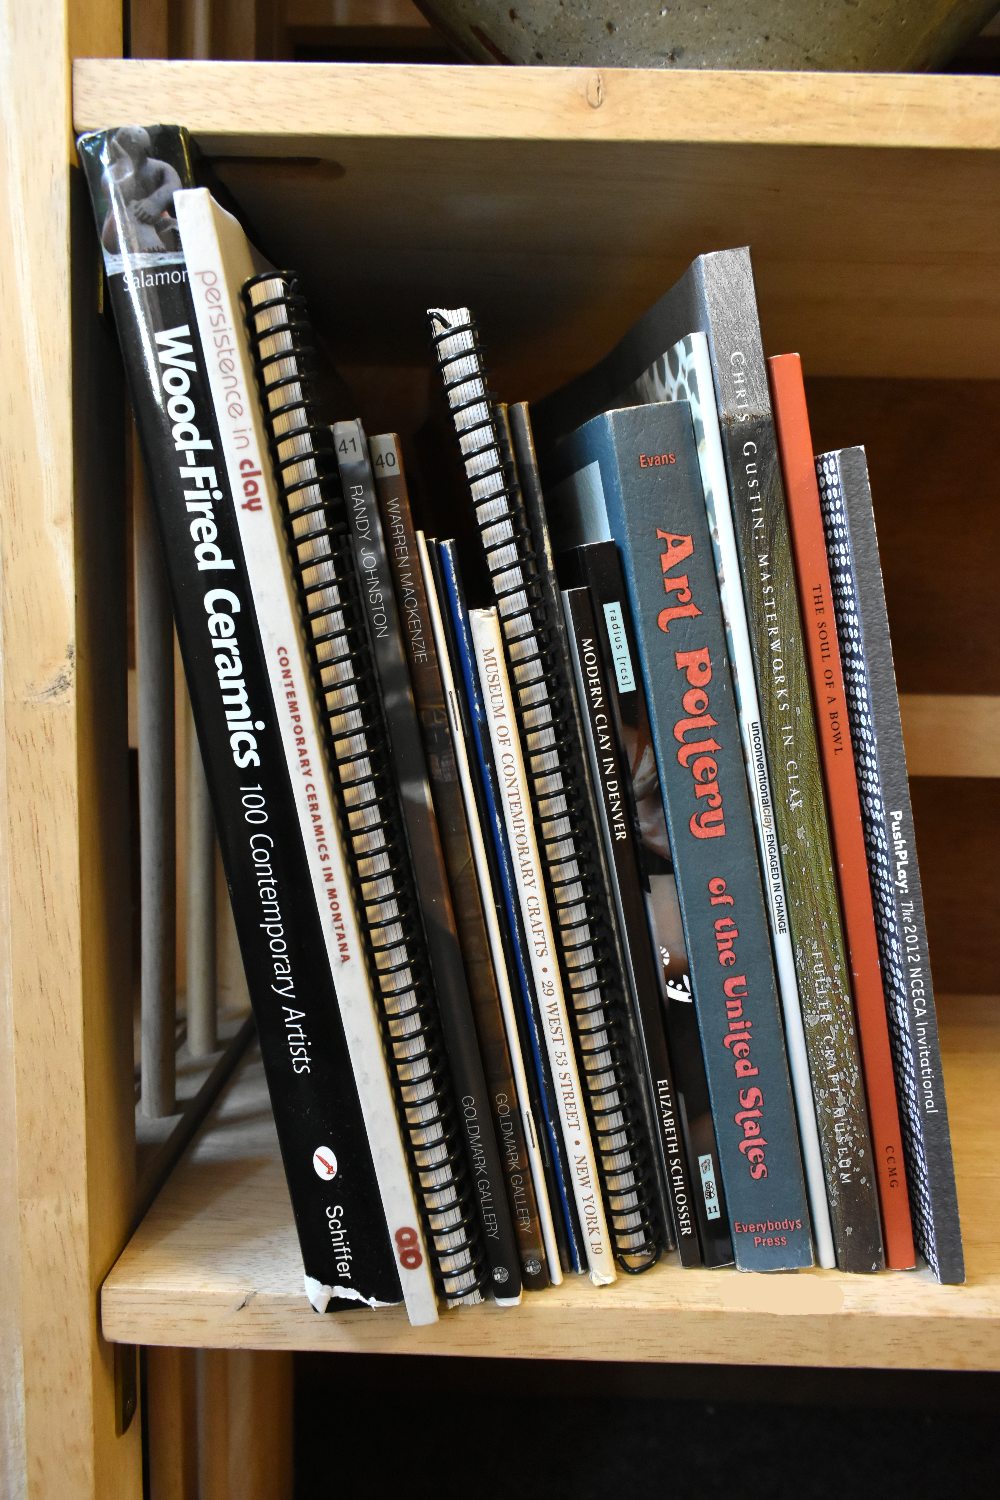 A collection of books and pamphlets on American studio ceramics.